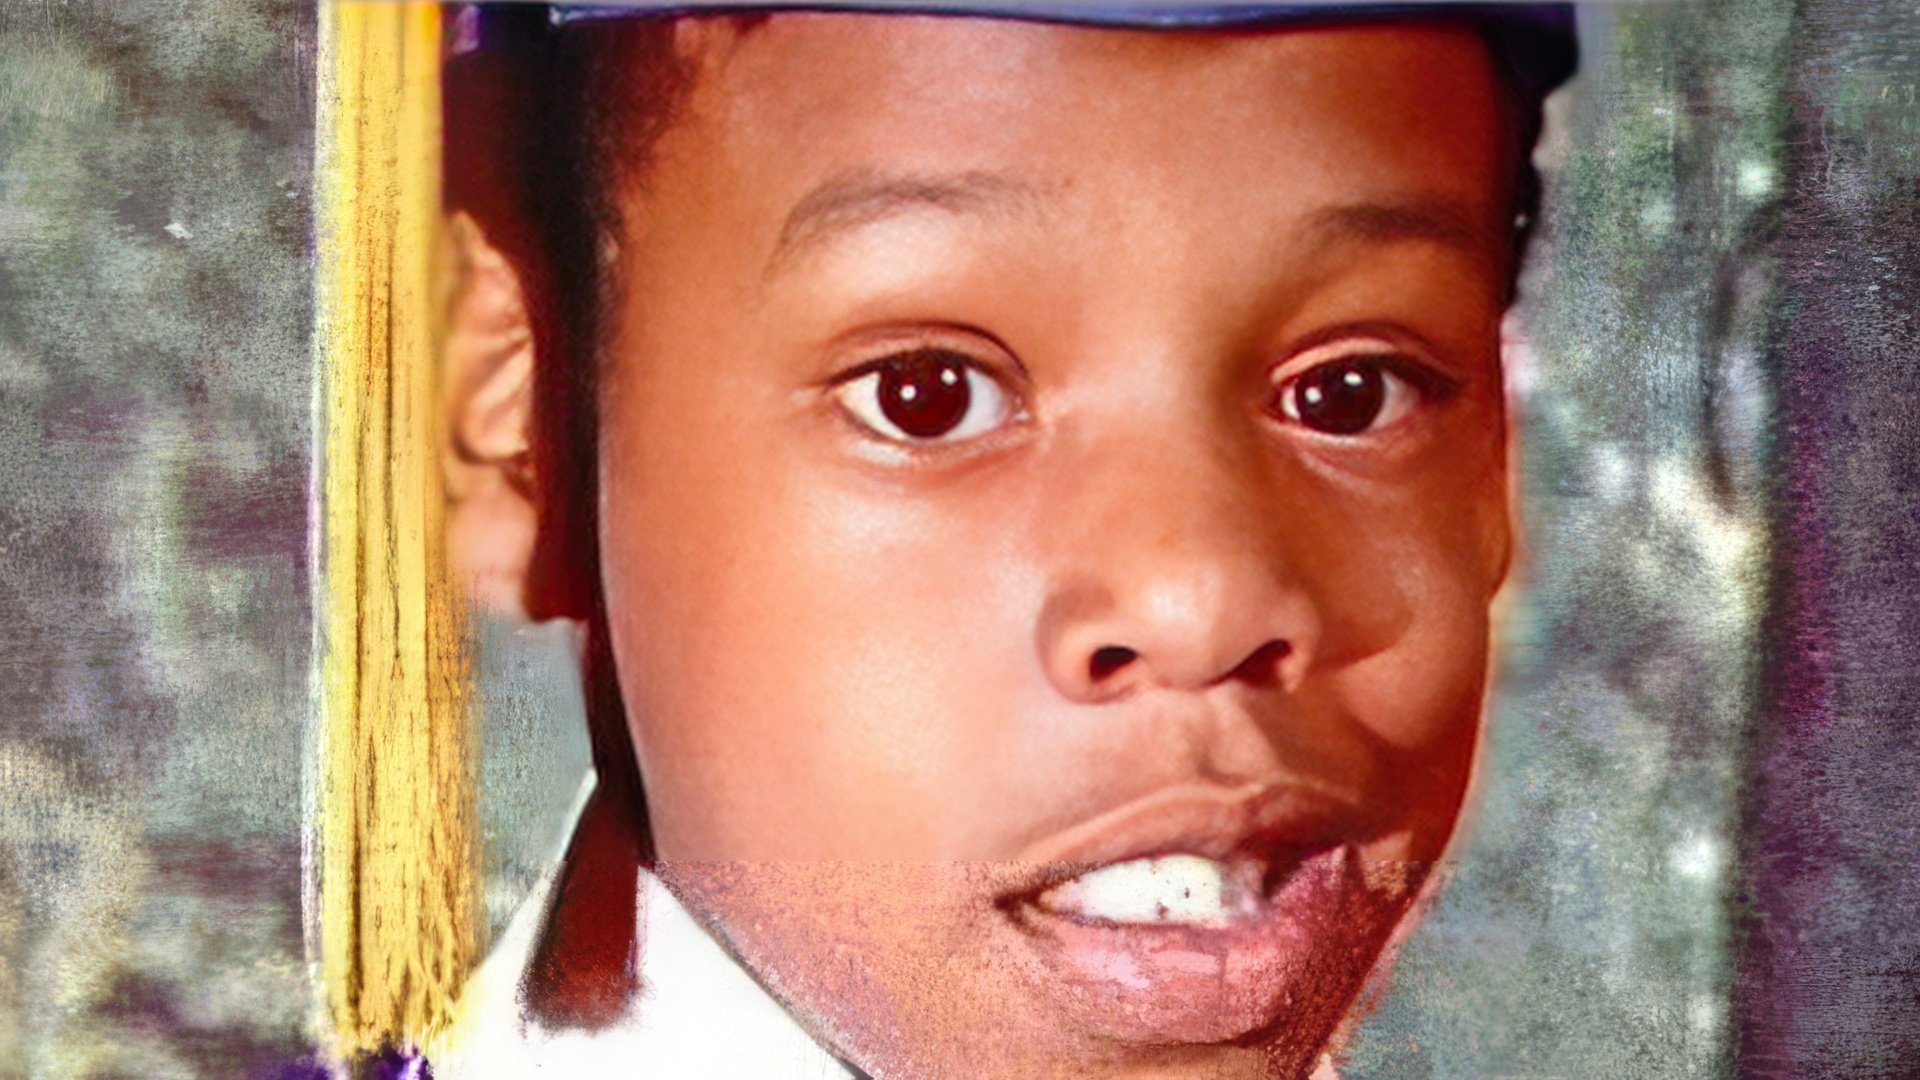 Jay-Z’s yearbook photo